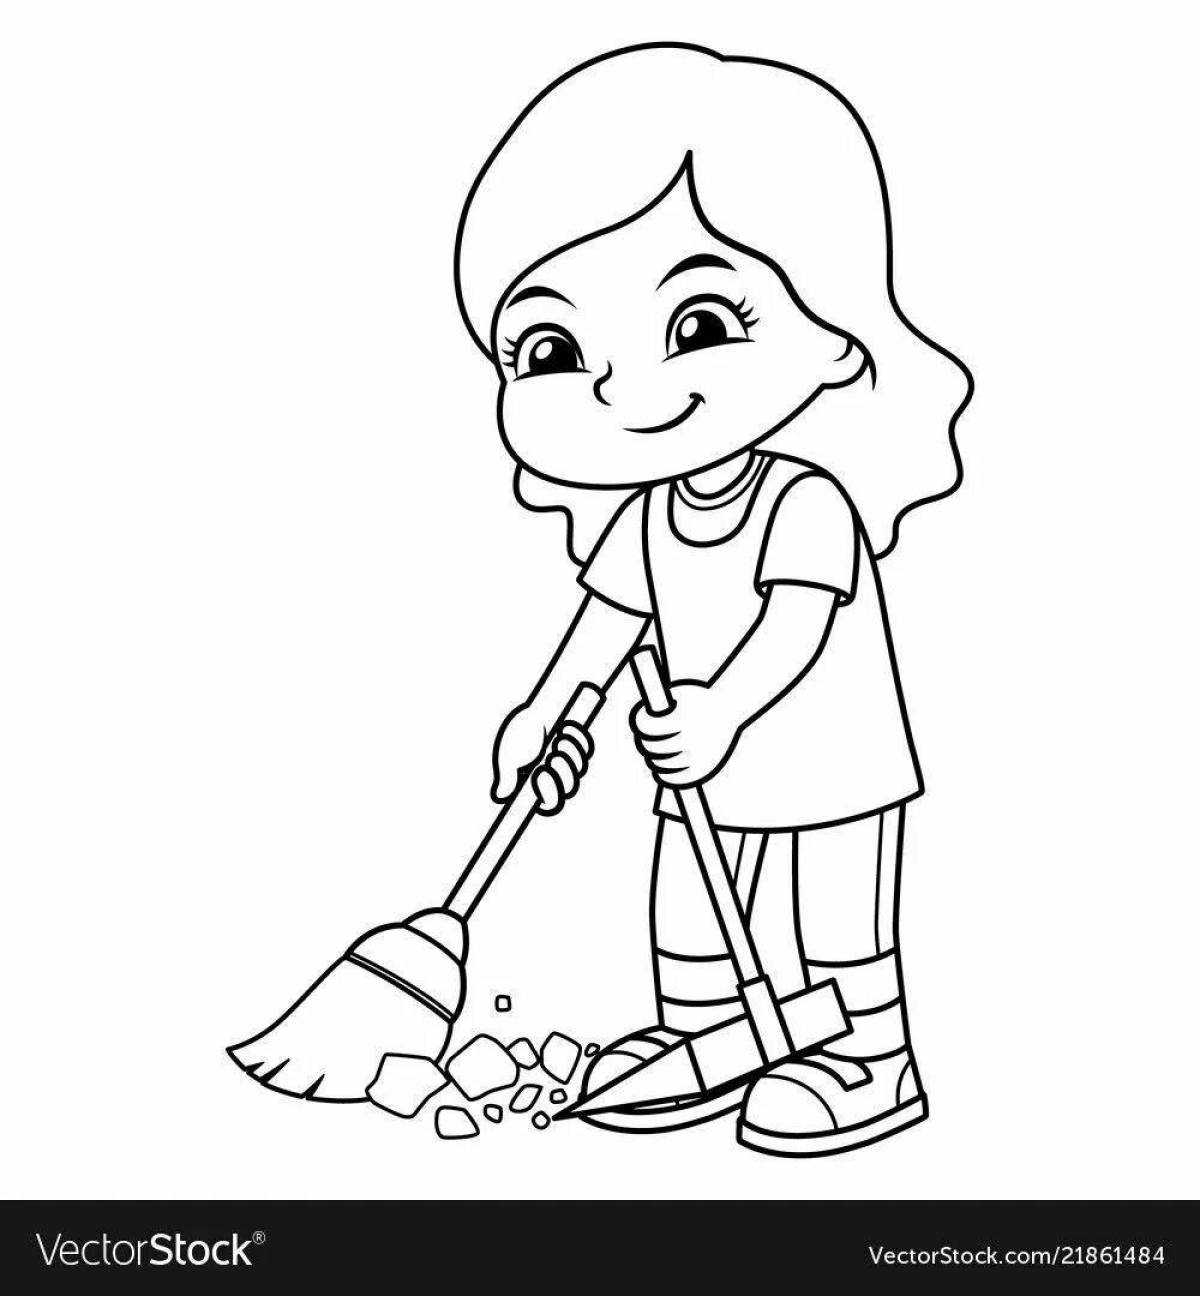 Coloring page dramatic cleaning